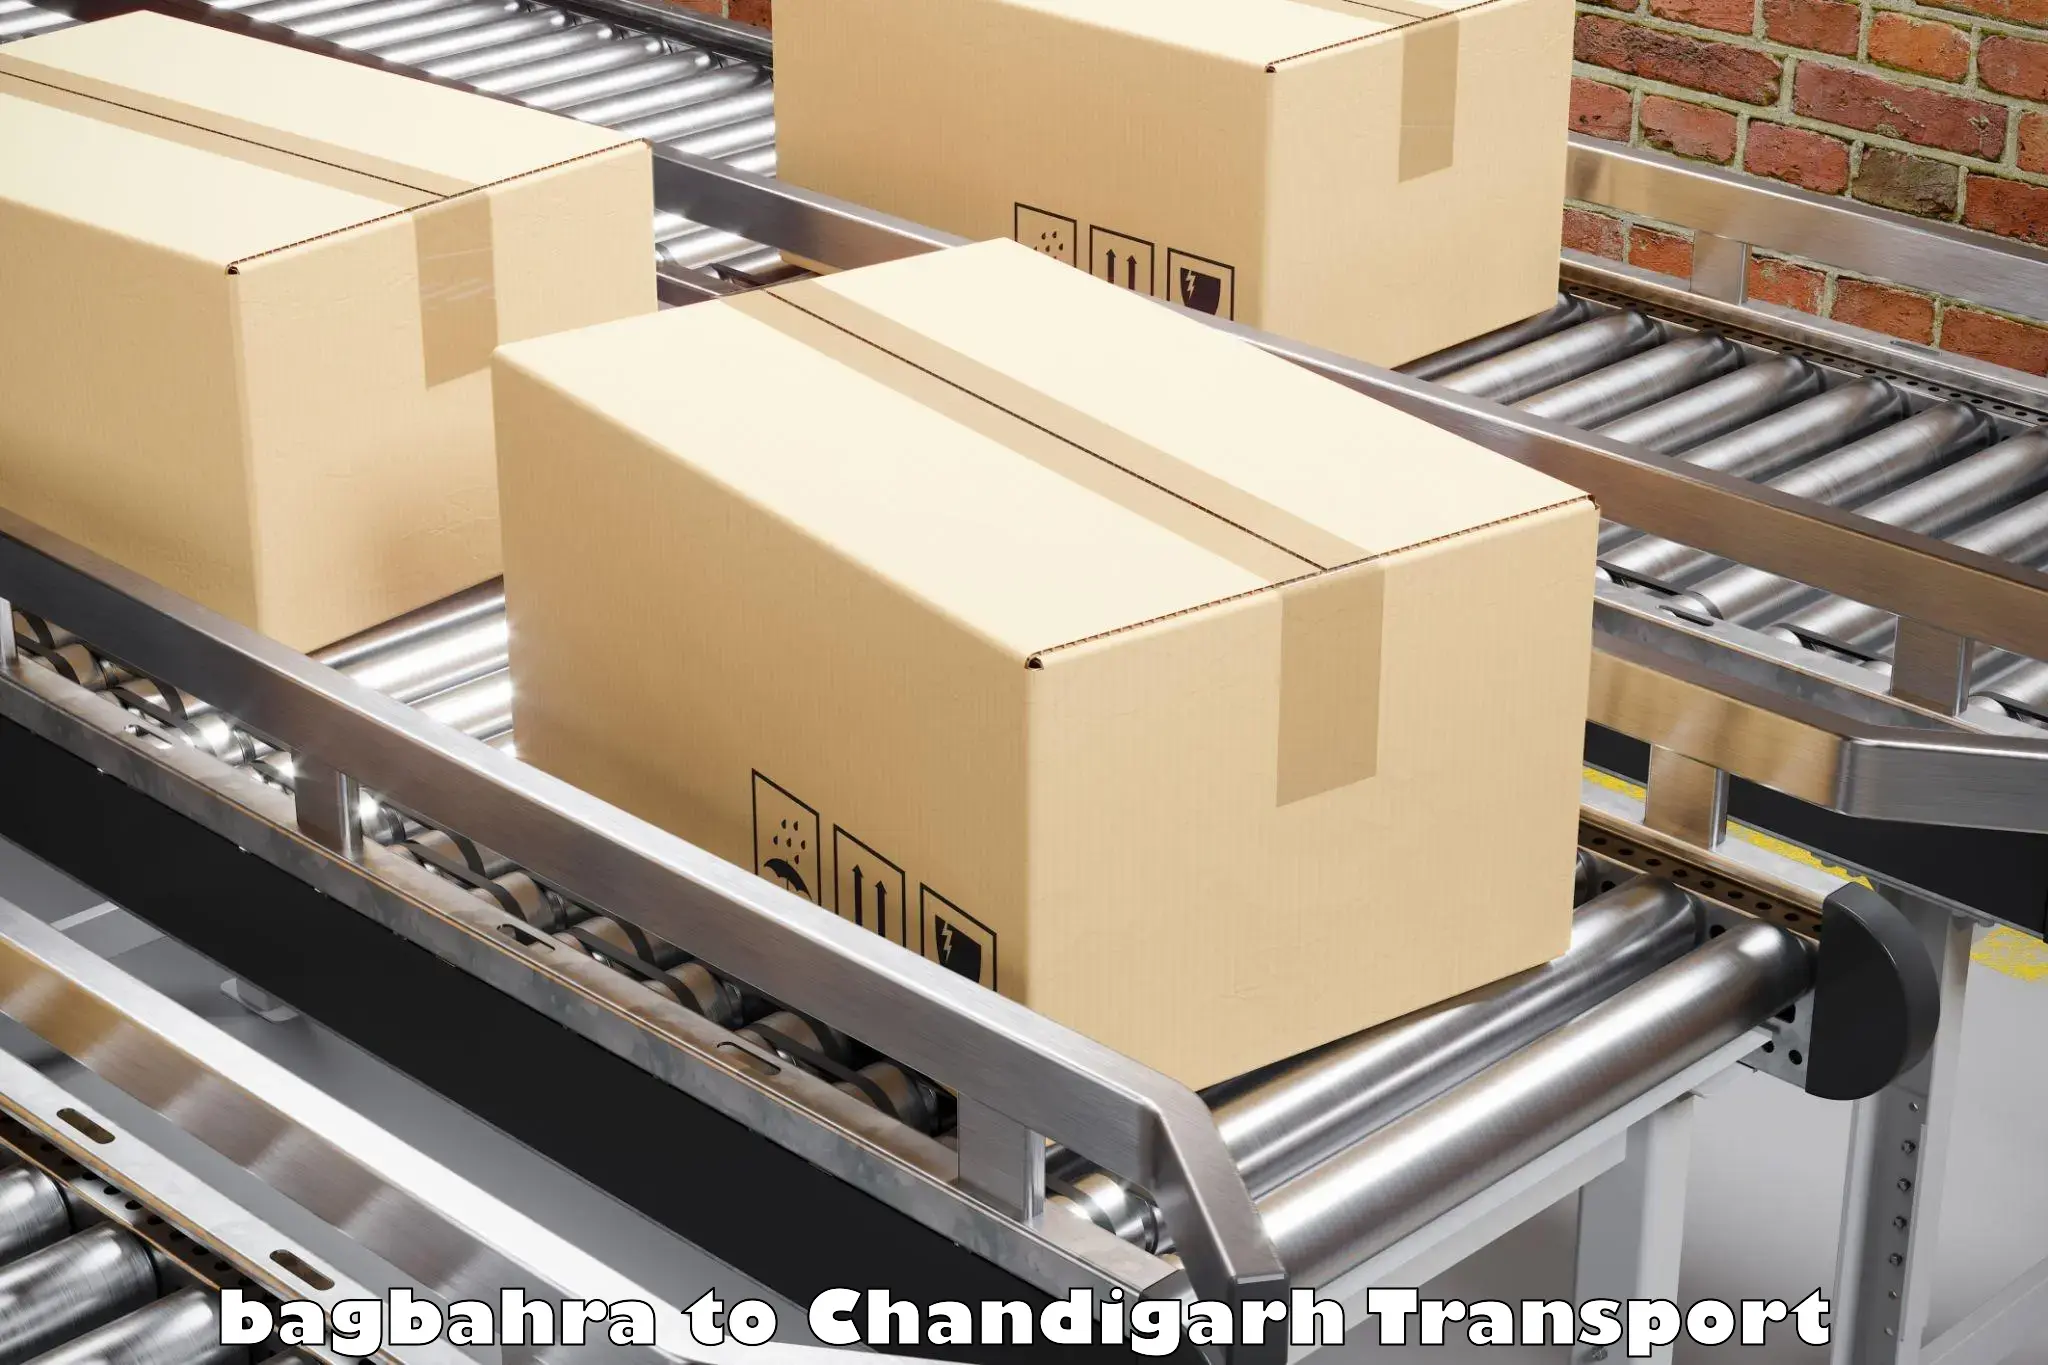 Luggage transport services in bagbahra to Chandigarh